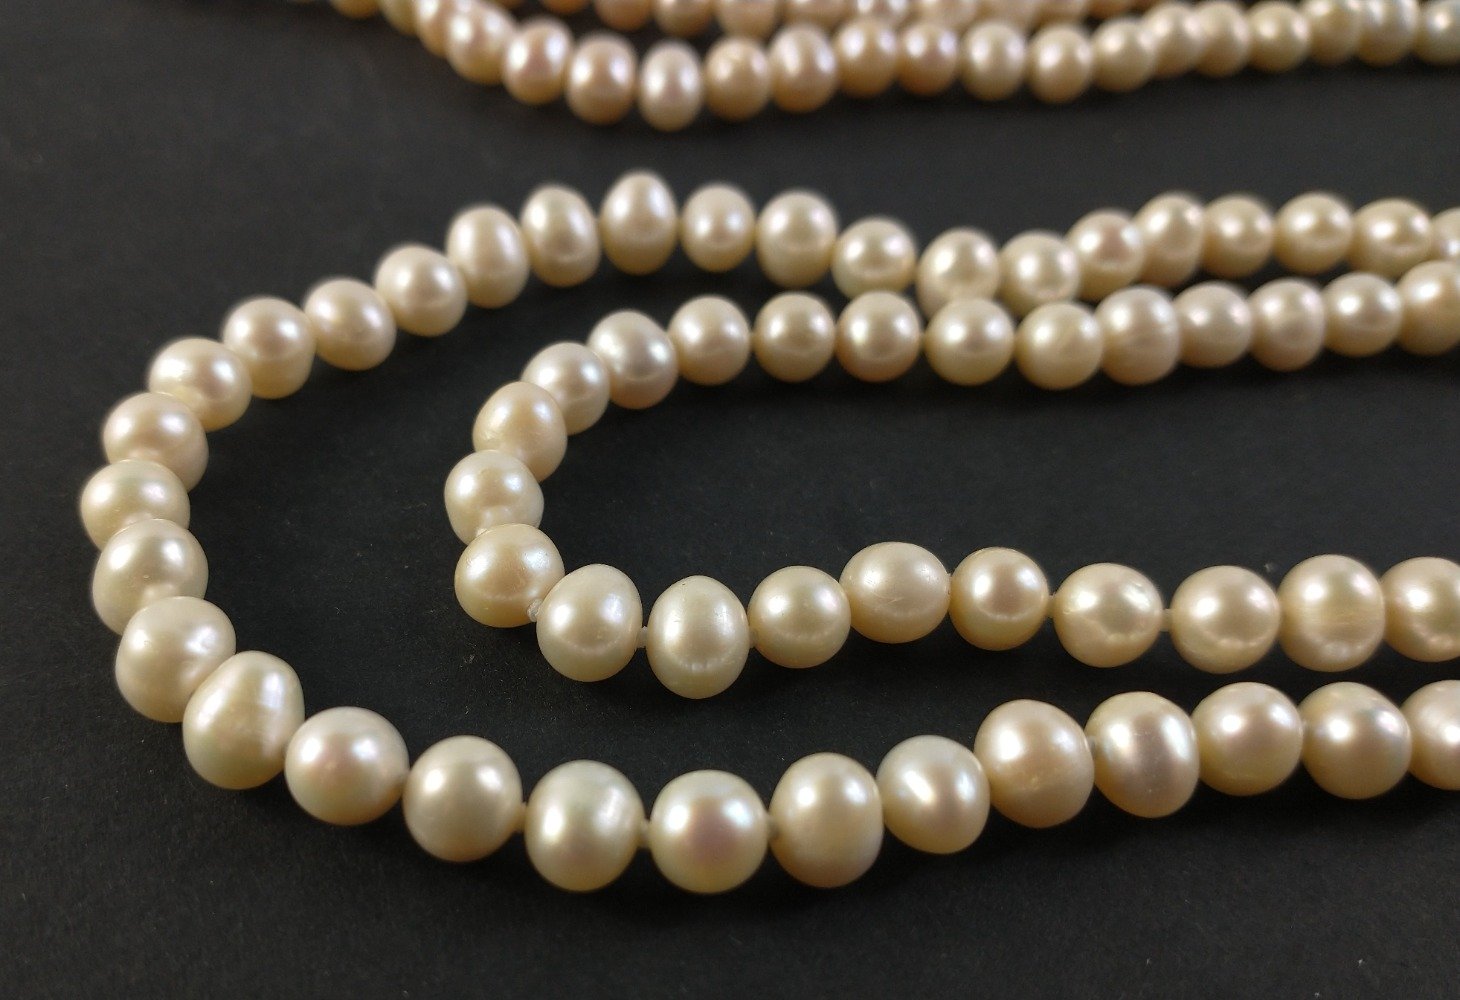 A string of fresh water pearls approx 250cm long - Image 2 of 3